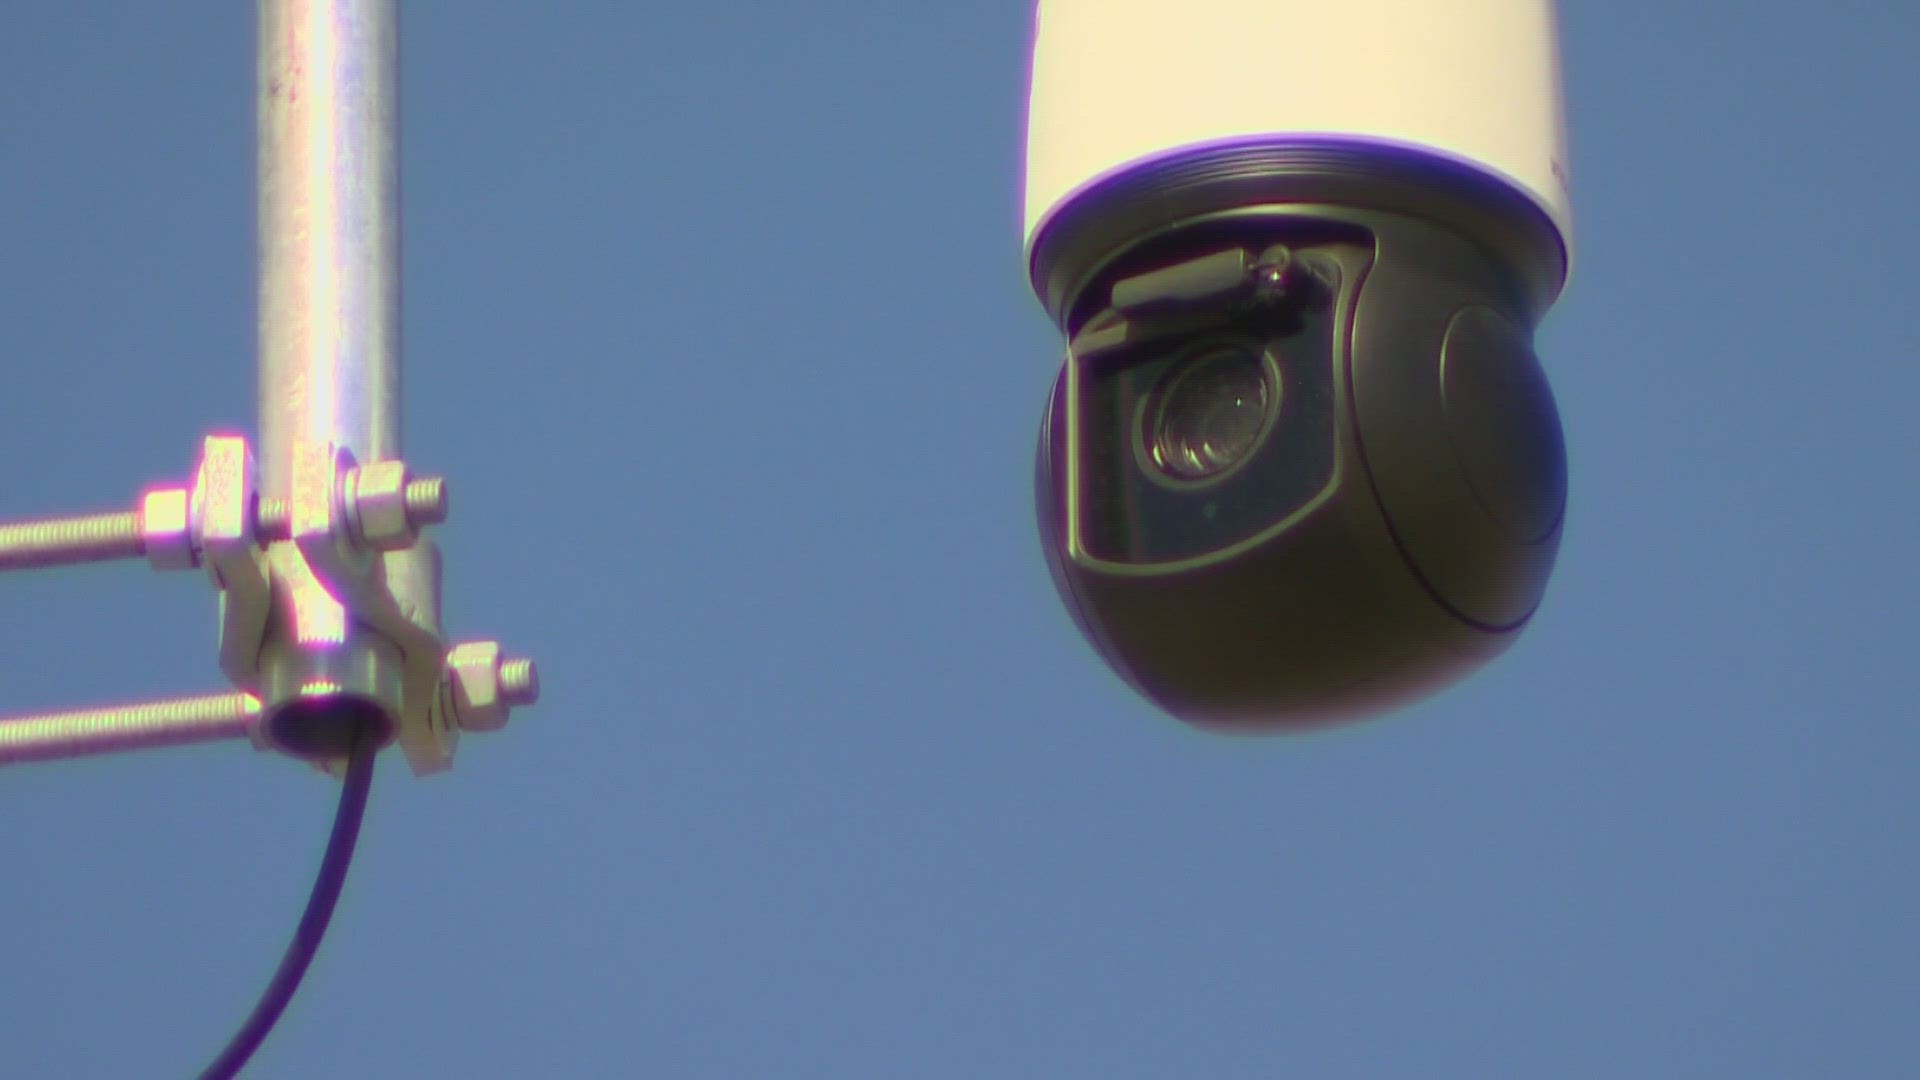 The Washington Department of Natural Resources has nine cameras placed around the state. Twelve more are on the way by next summer.